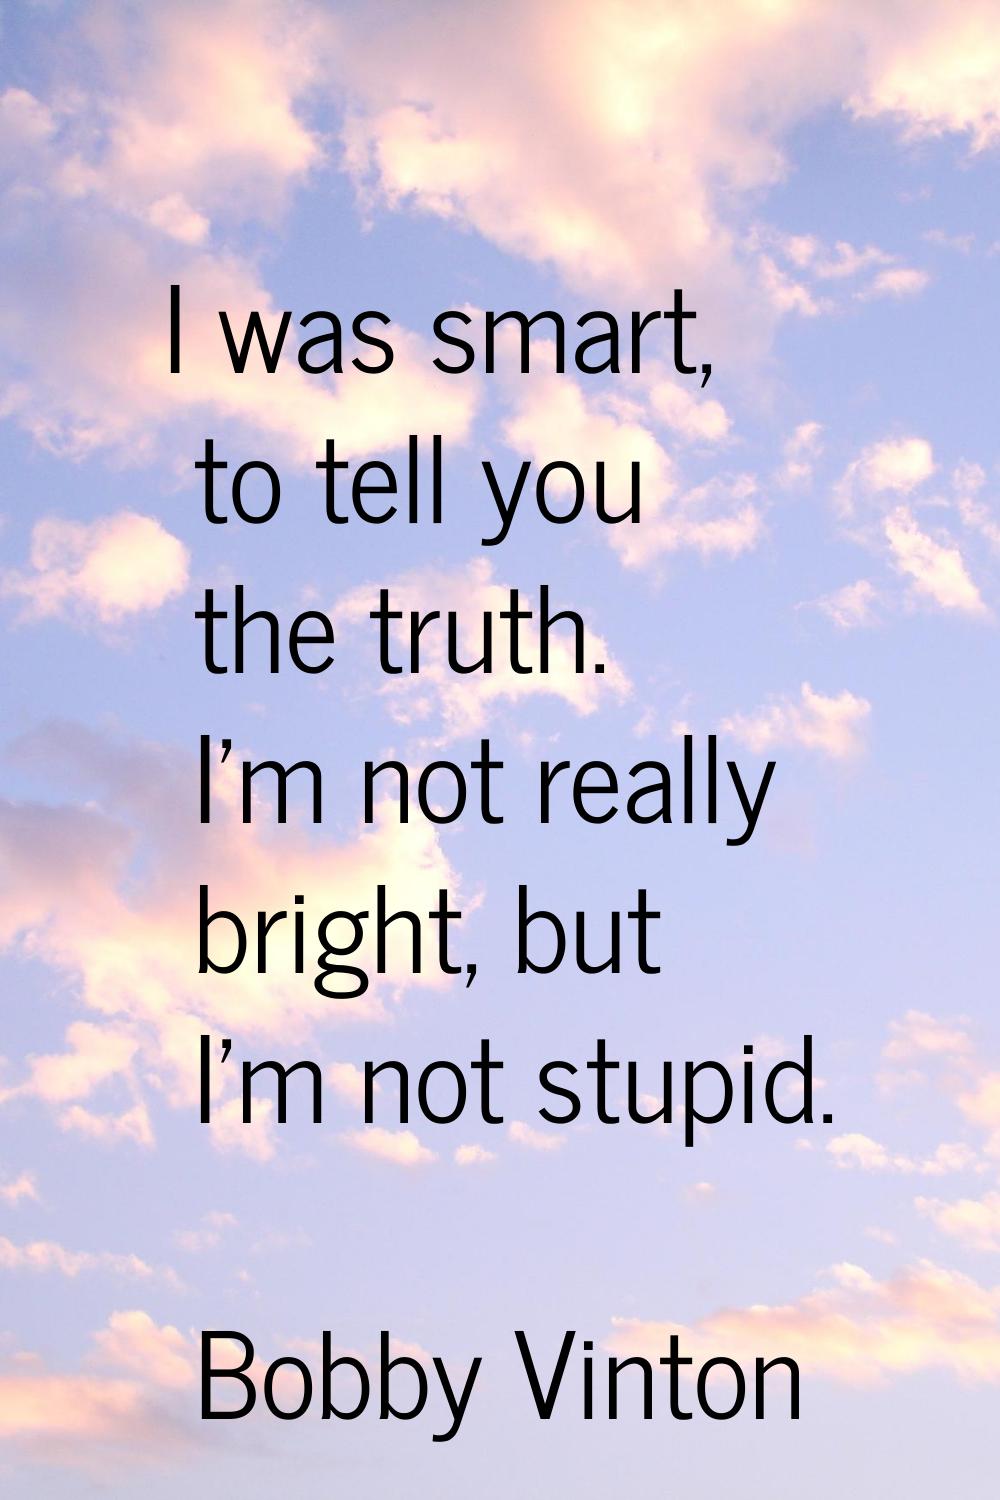 I was smart, to tell you the truth. I'm not really bright, but I'm not stupid.